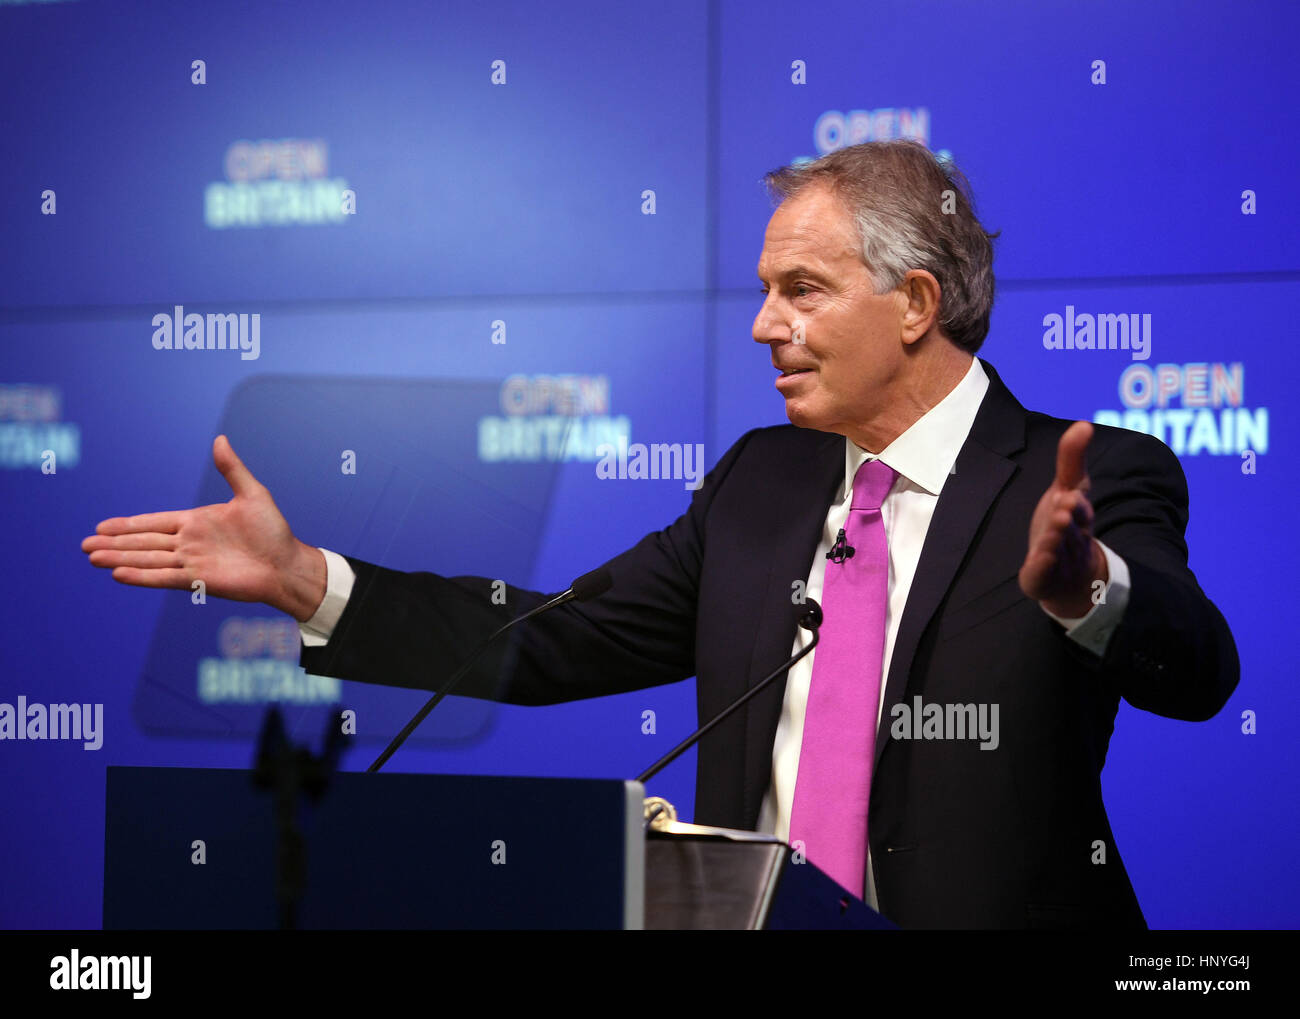 Former Prime Minister Tony Blair during his speech on Brexit at an Open Britain event in central London. Stock Photo